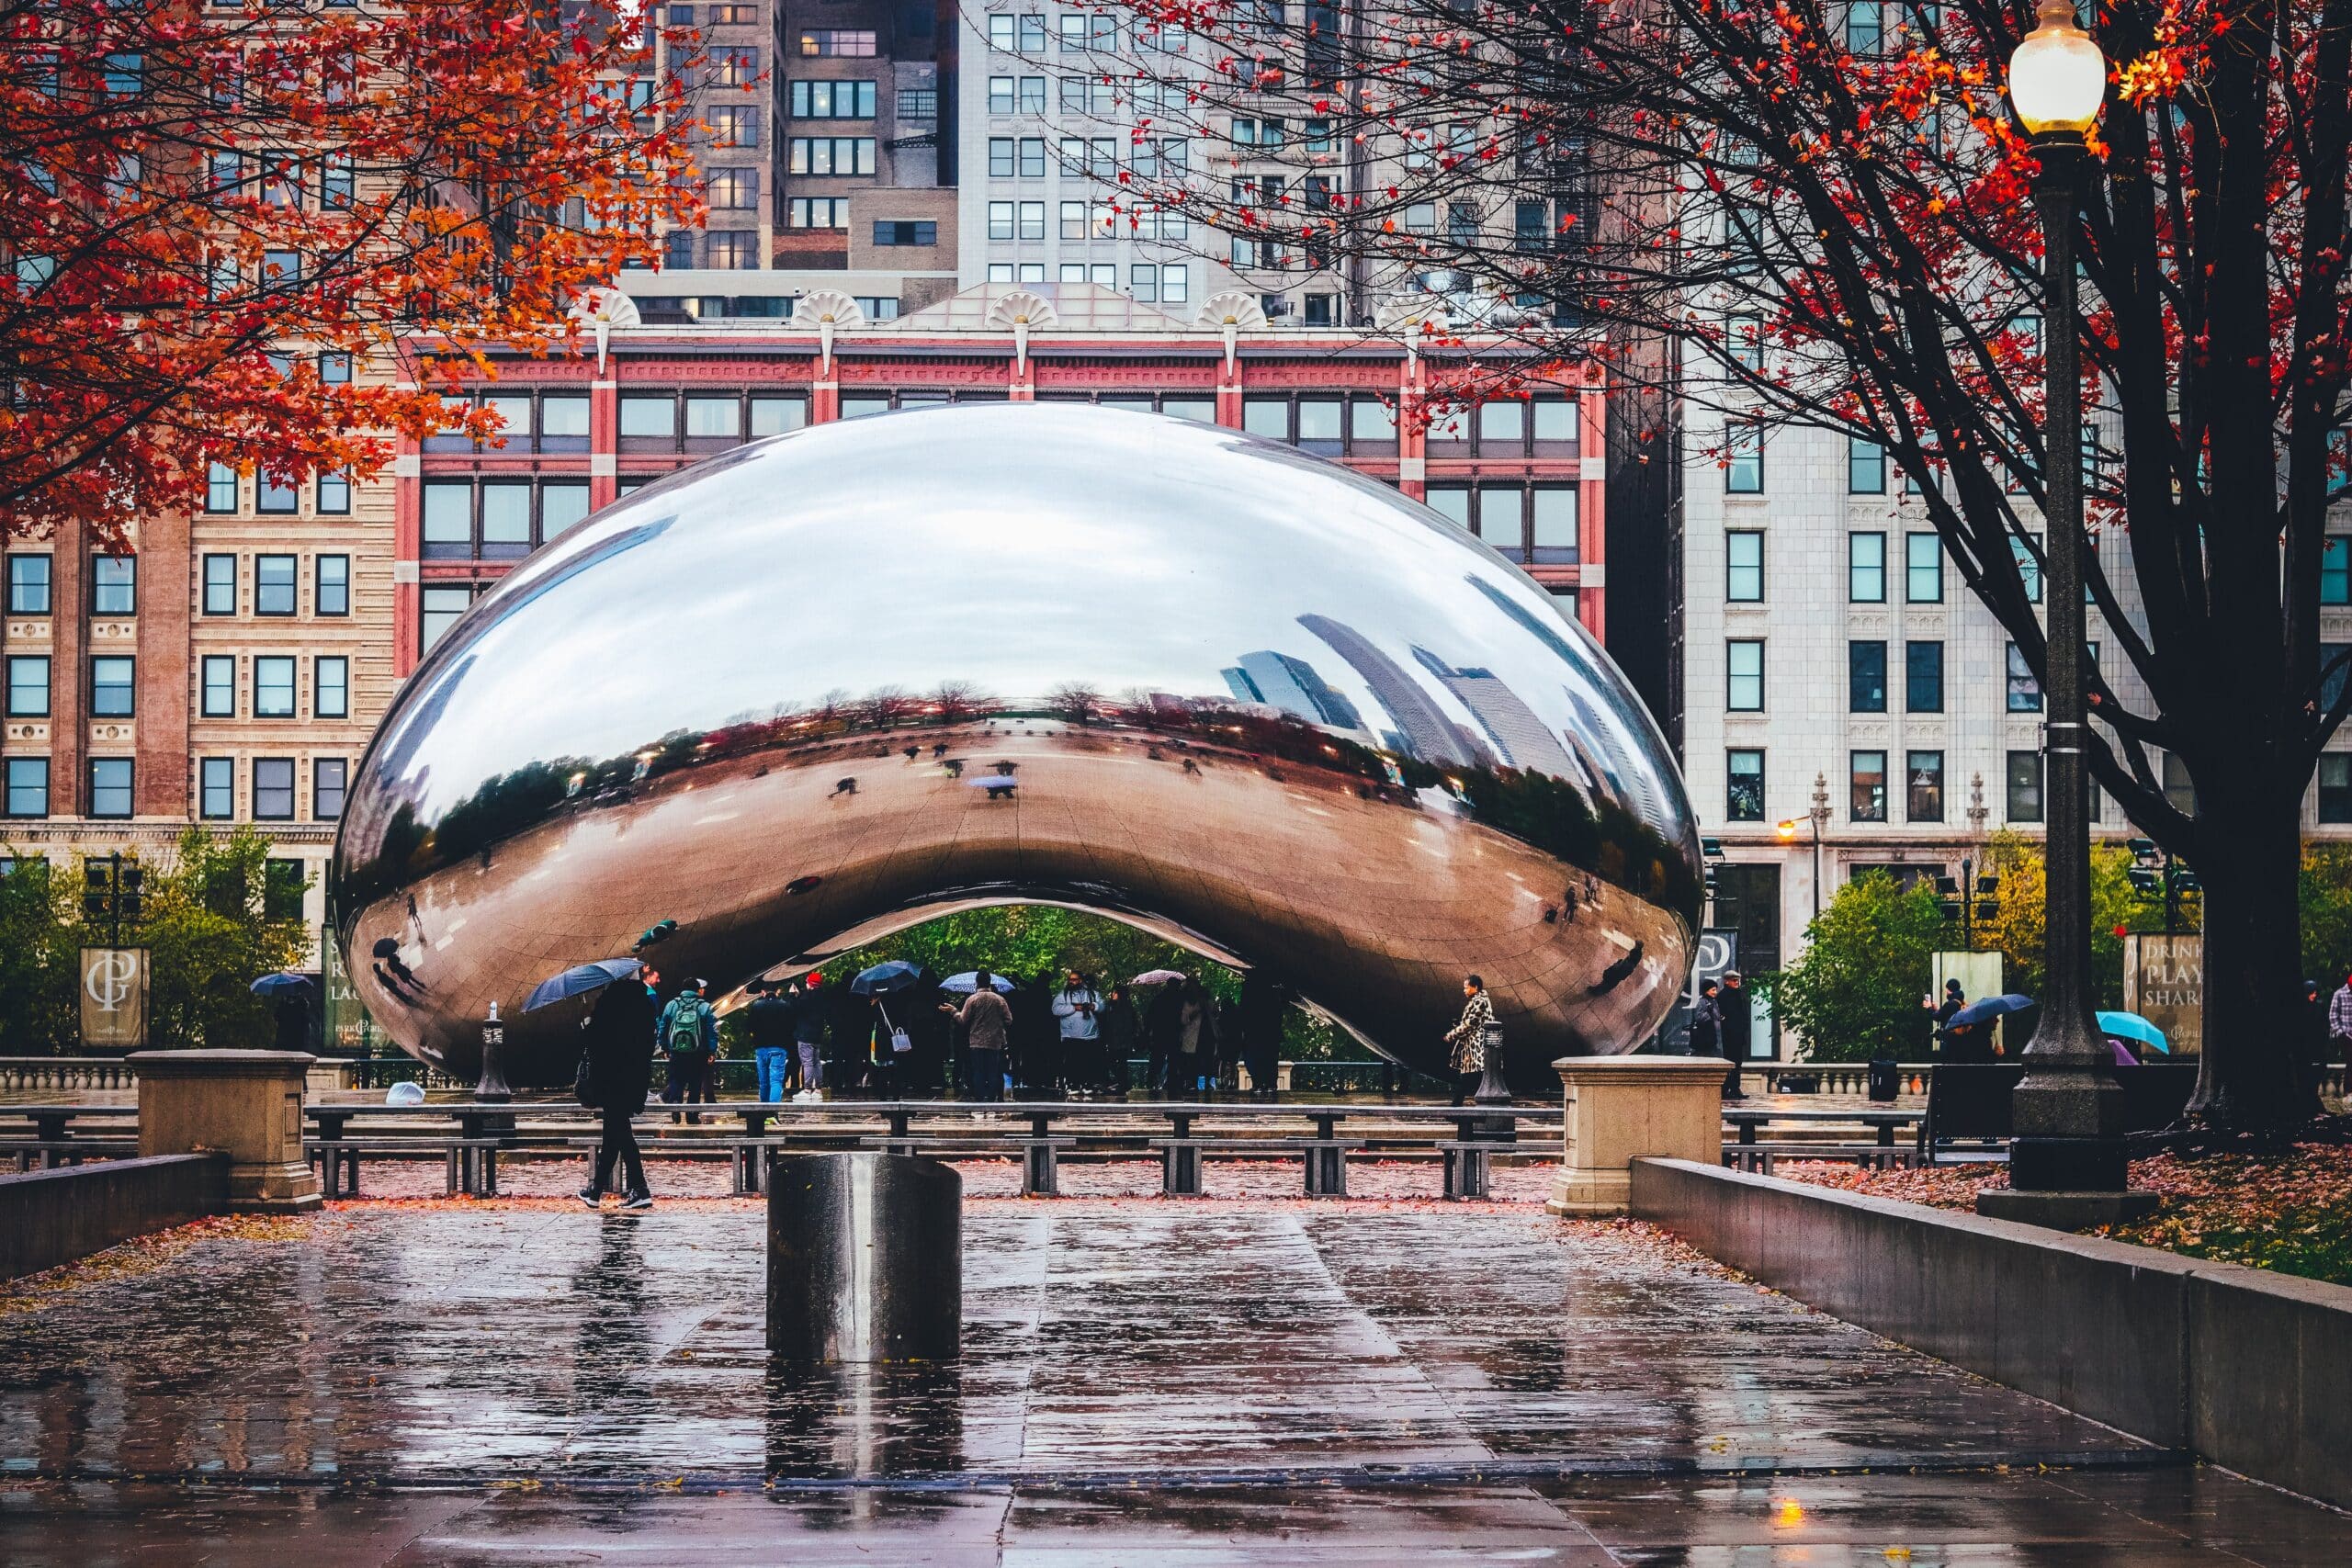 Picture of Chicago's bean in the fall